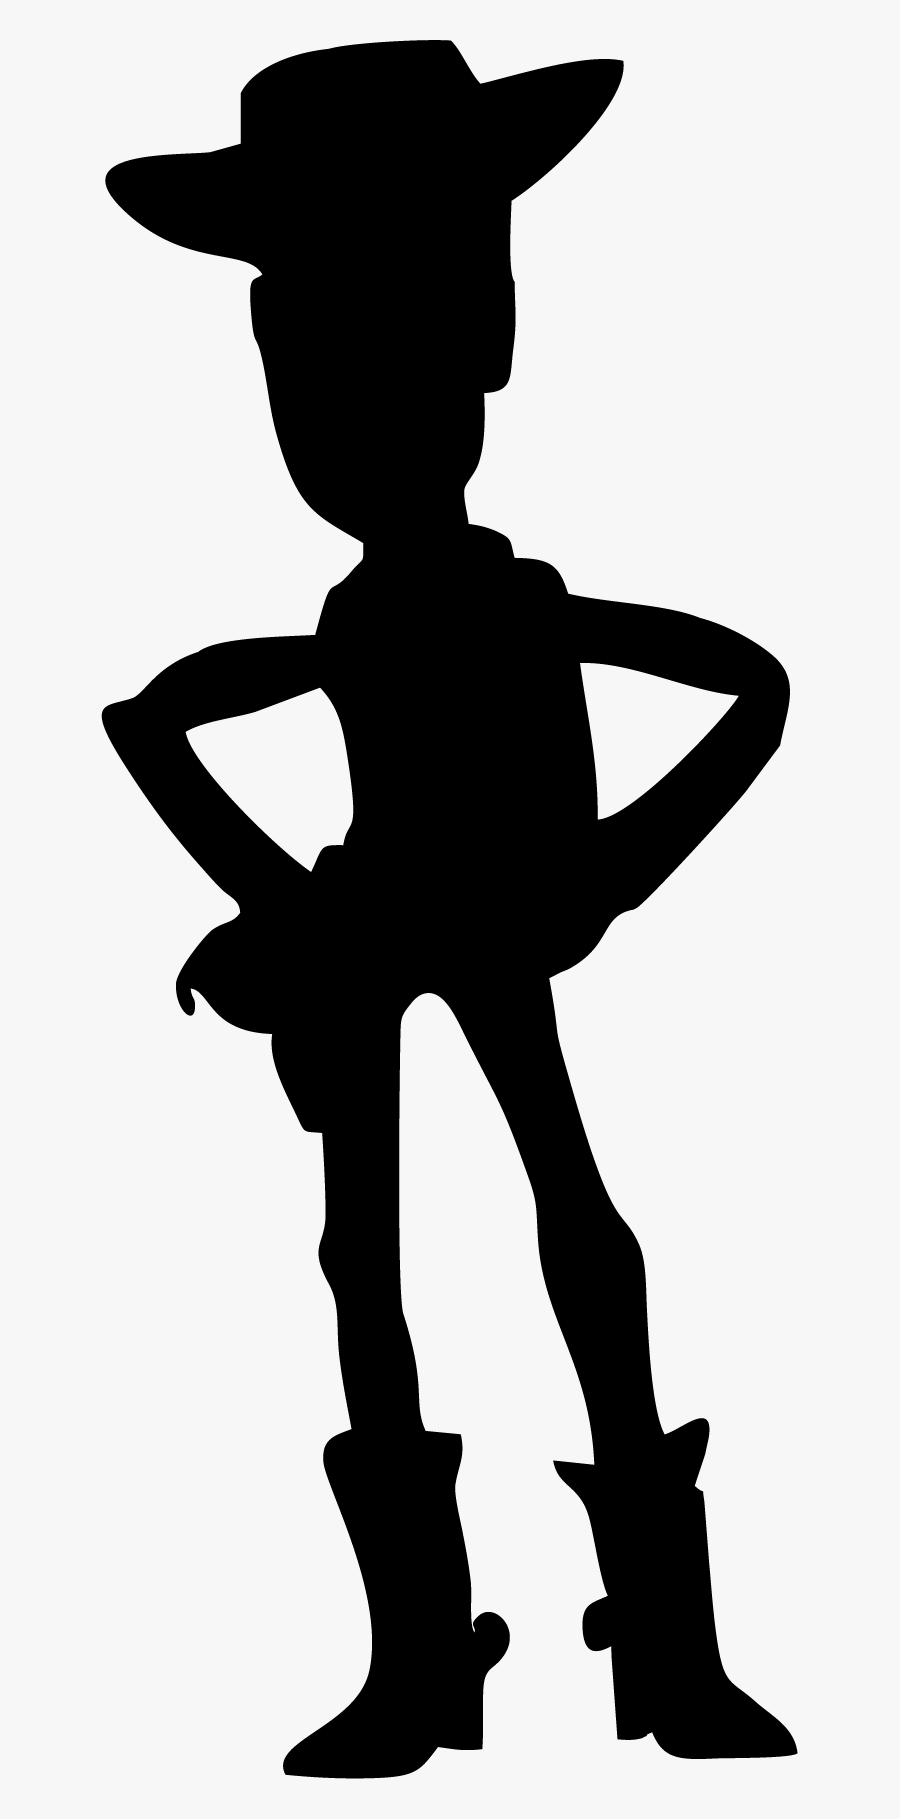 Download Woody Toy Story Svg , Transparent Cartoons - Woody Toy Story Silhouette , Free Transparent ...